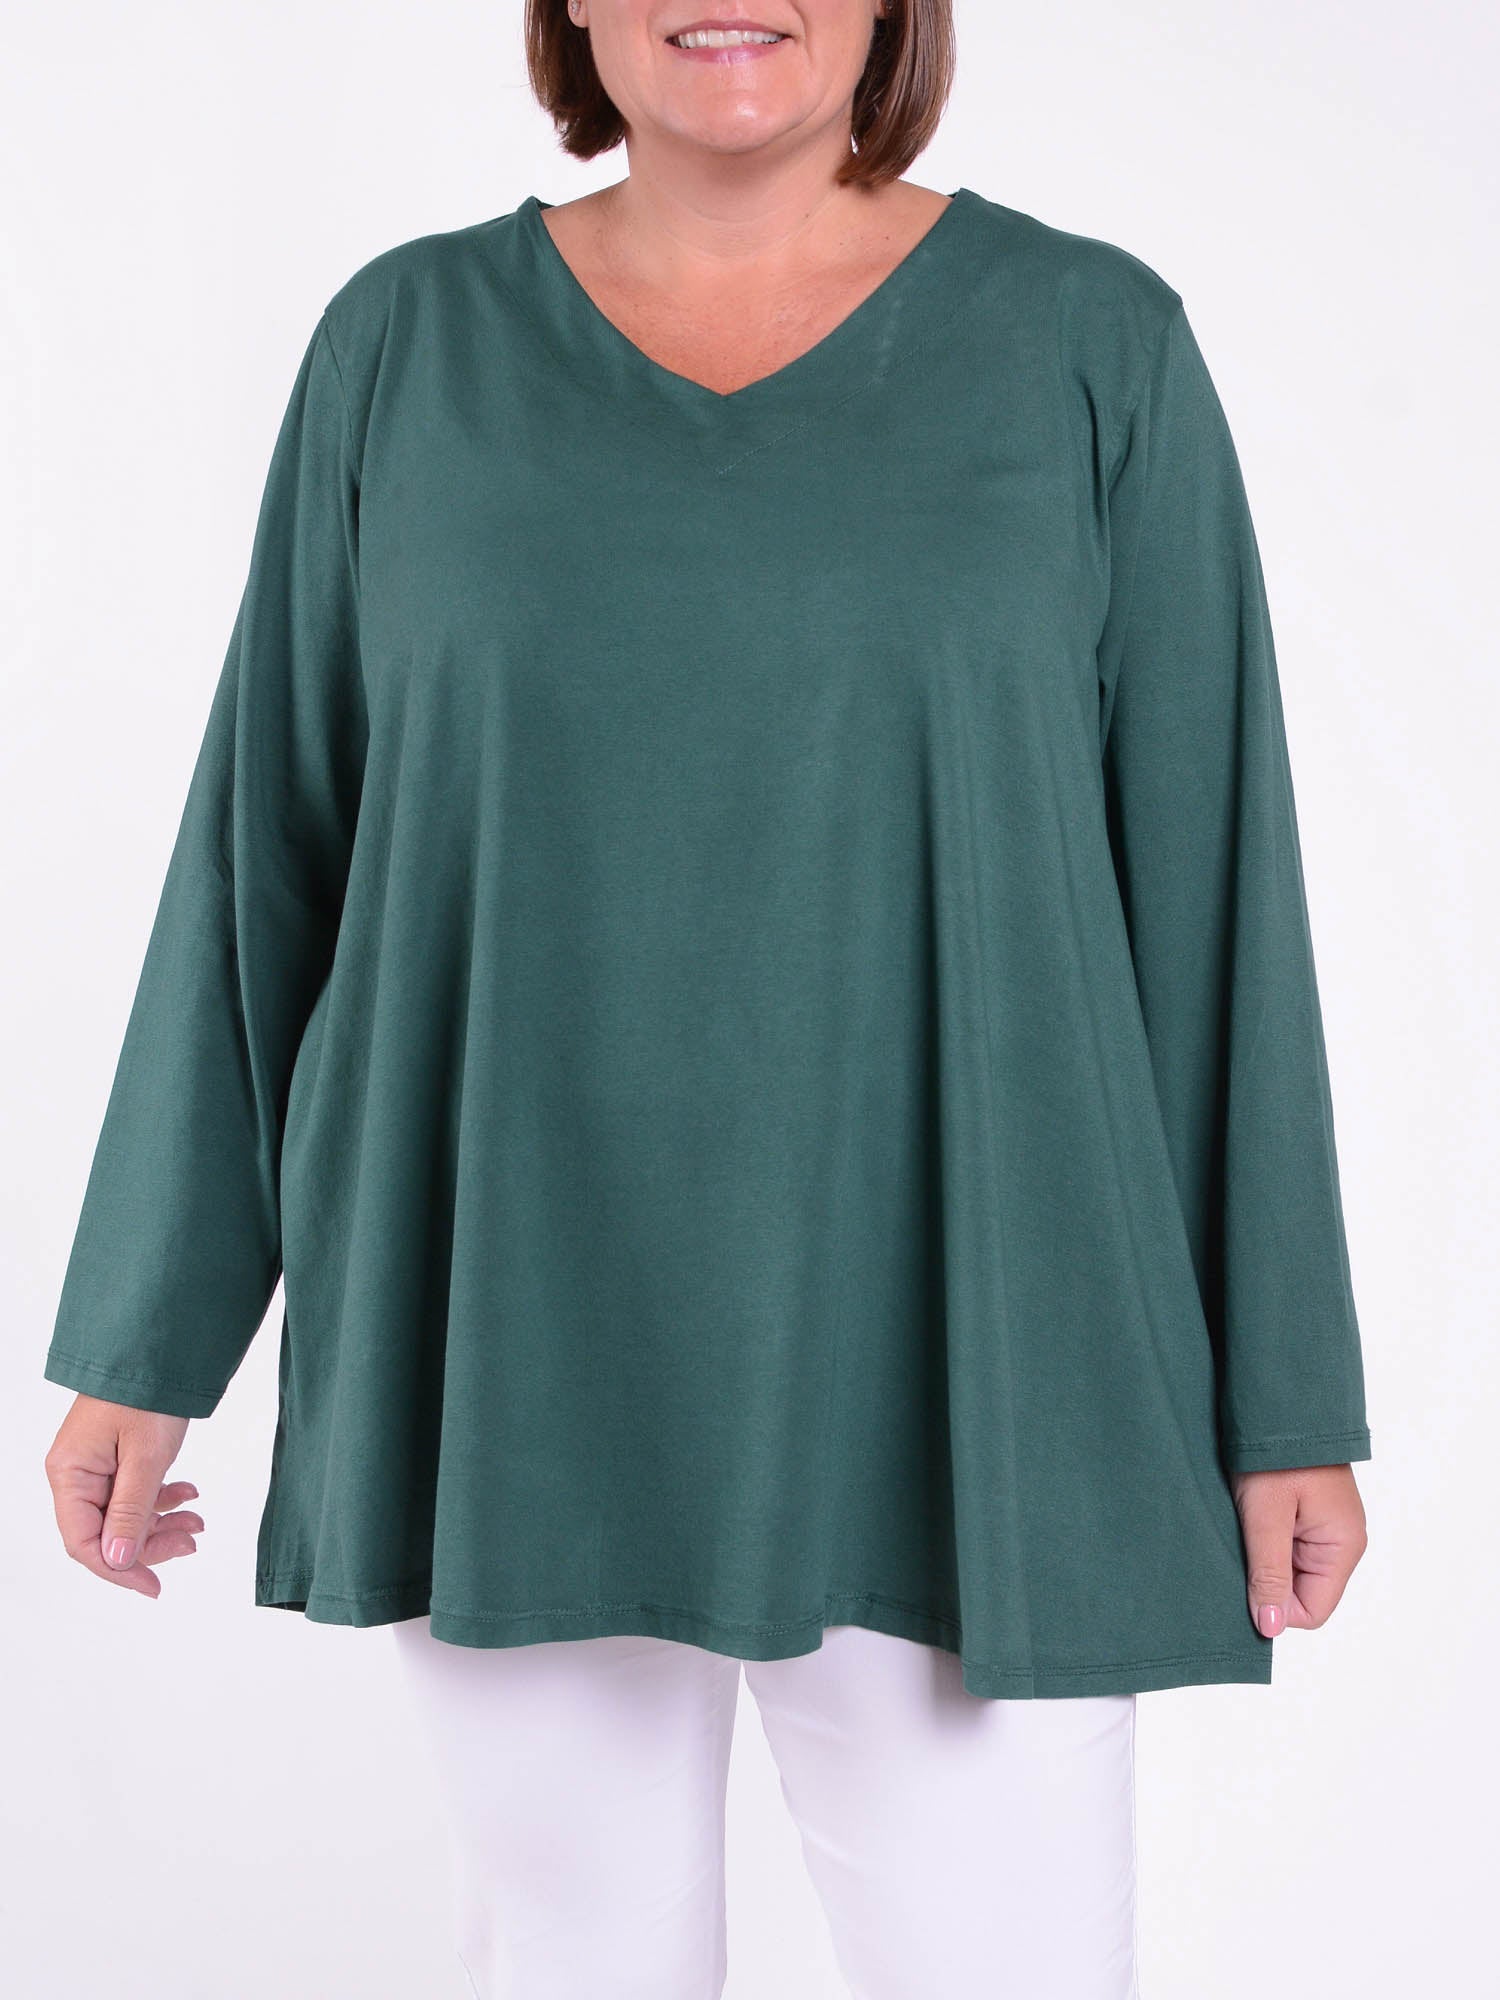 Cotton Swing Top - V Neck 20520 LONG SLEEVE, Tops & Shirts, Pure Plus Clothing, Lagenlook Clothing, Plus Size Fashion, Over 50 Fashion